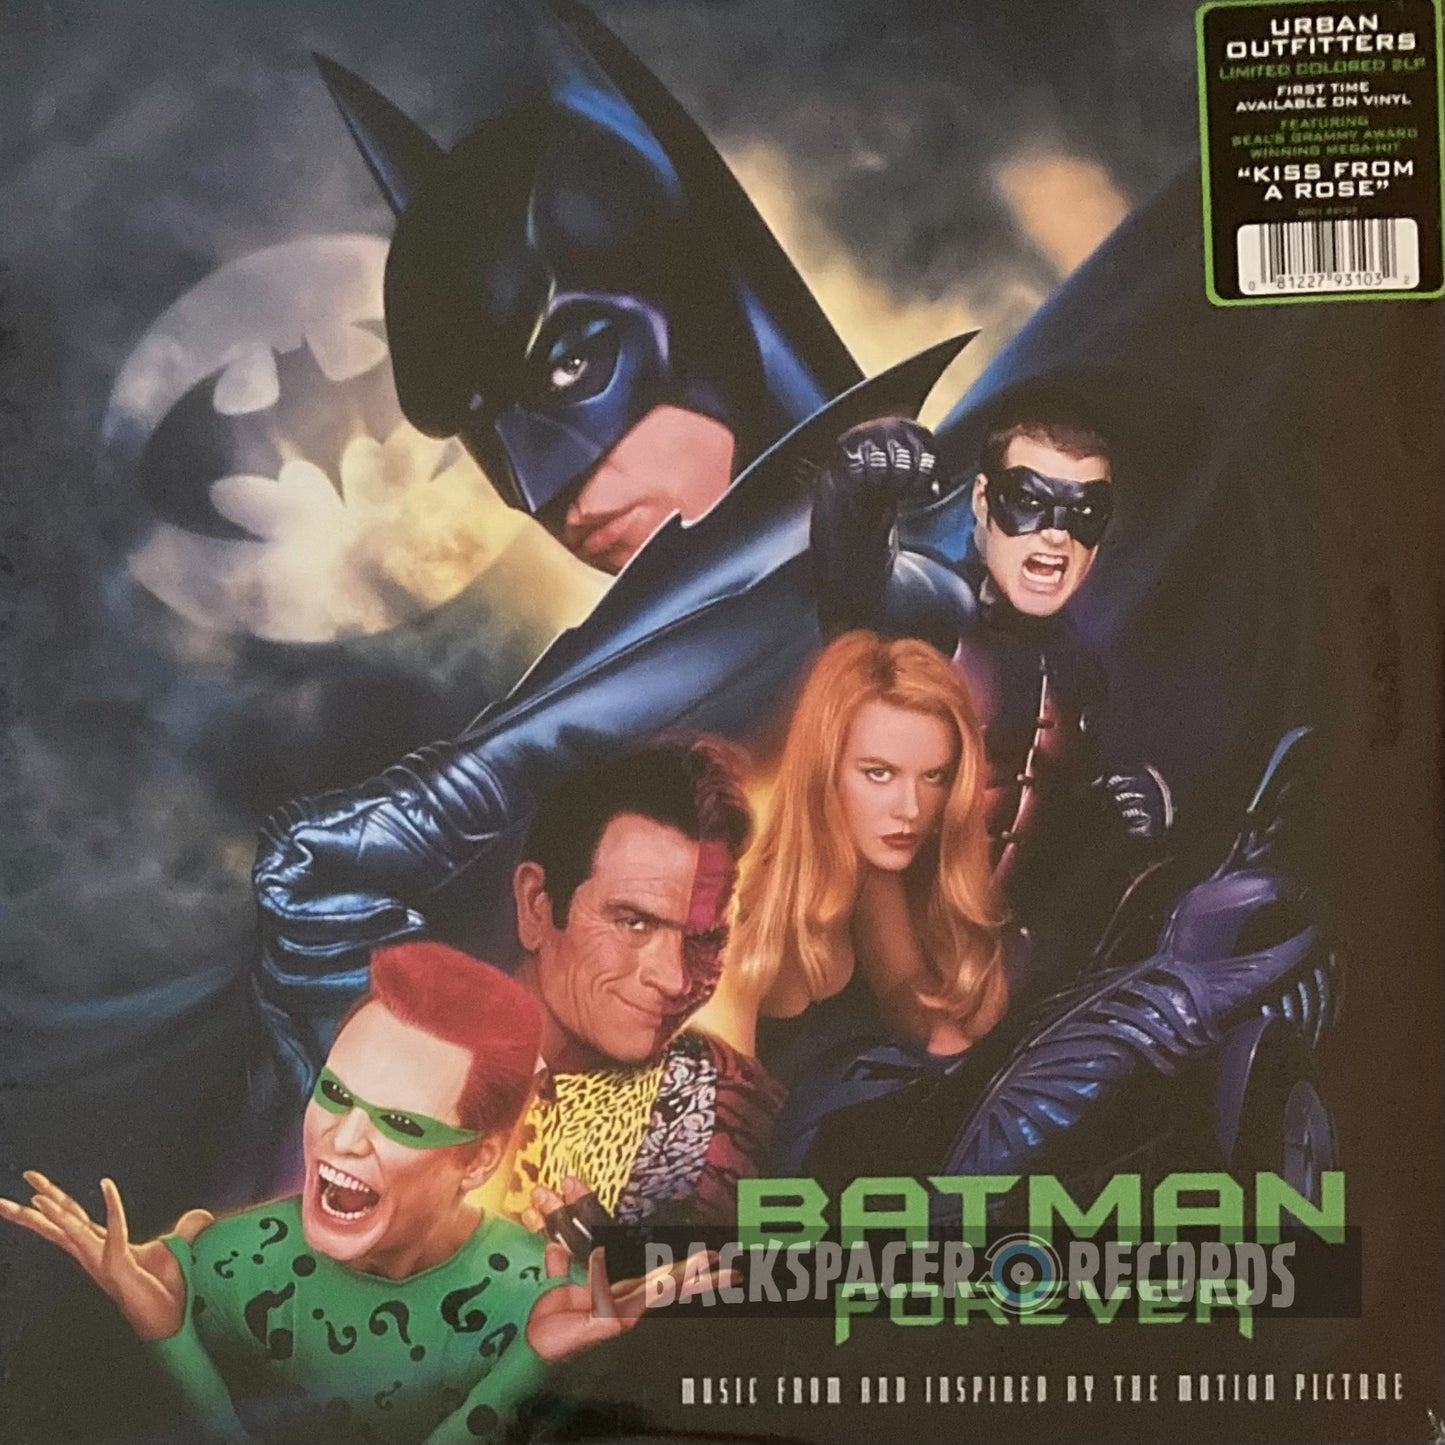 Batman Forever: Music From & Inspired By The Motion Picture - Various Artists (Limited Edition) 2-LP (Sealed)